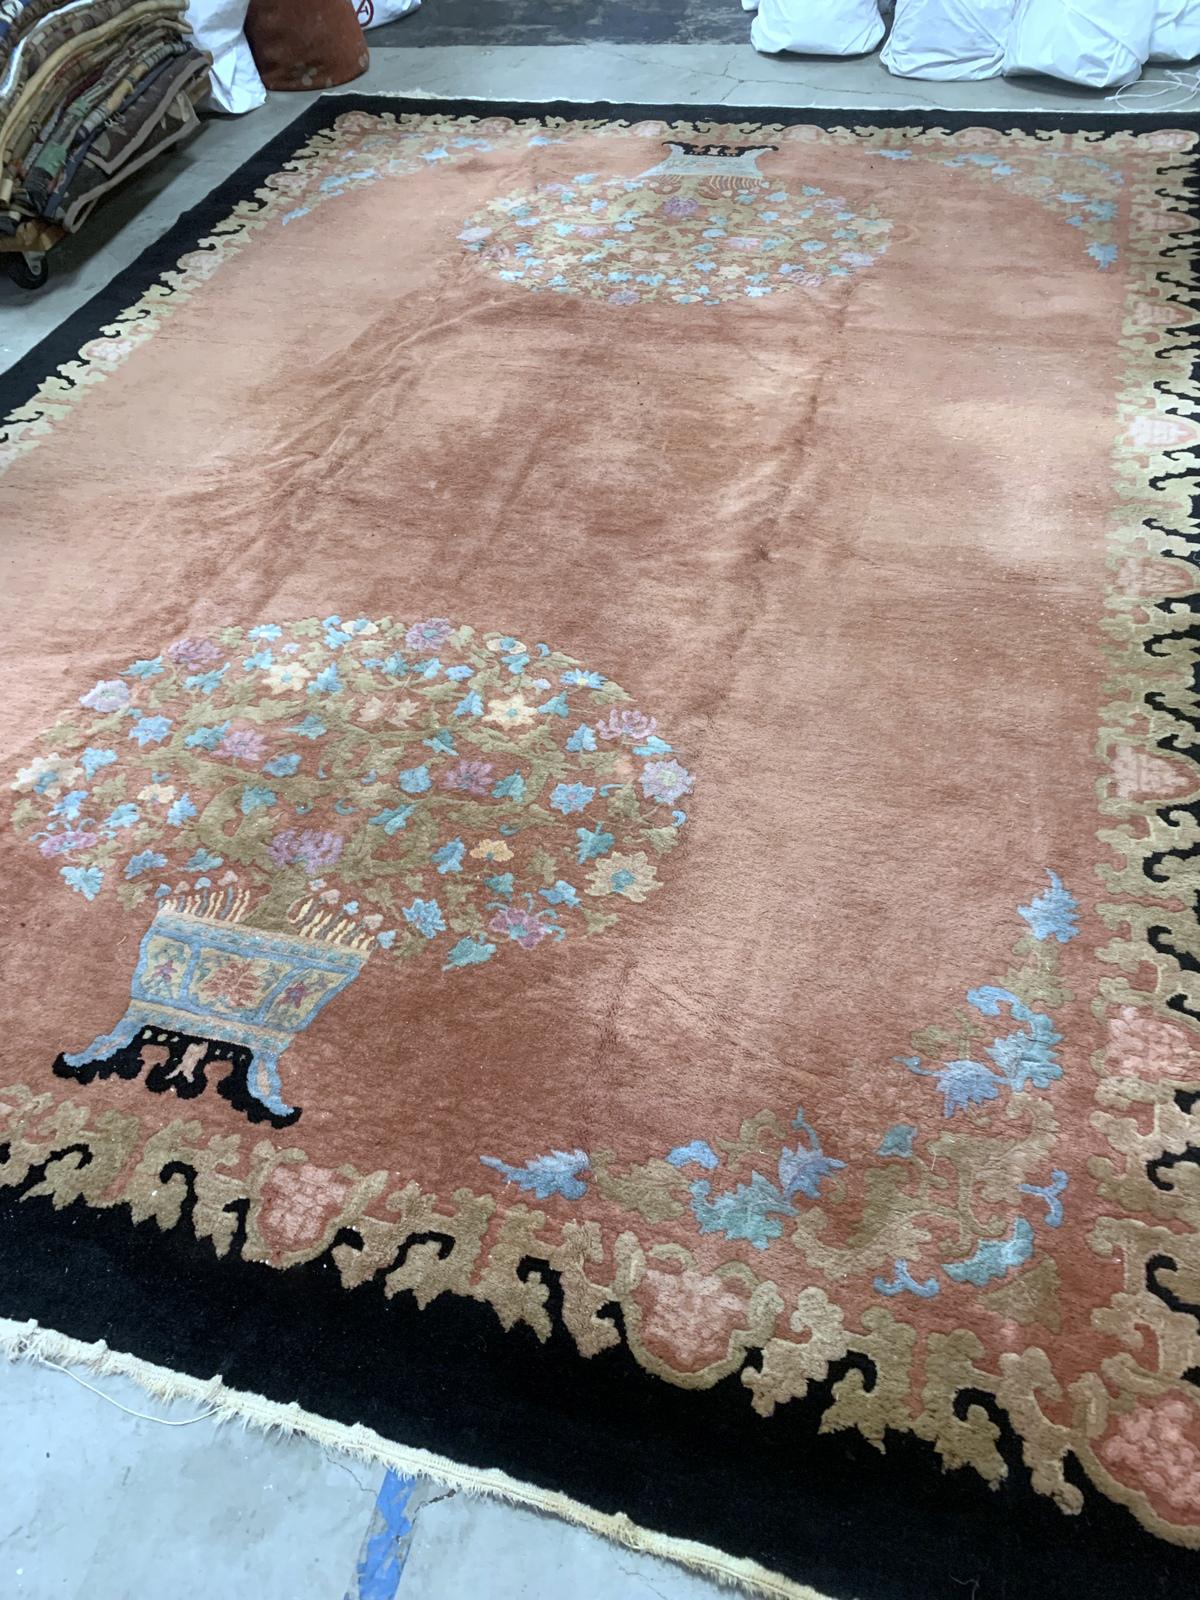 Handmade antique Art Deco Chinese rug in pink and black colors. The rug is from the beginning of 20th century in original condition, it has some low pile areas.

-condition: original, some low pile,

-circa: 1920s,

-size: 8.10' x 11.10'